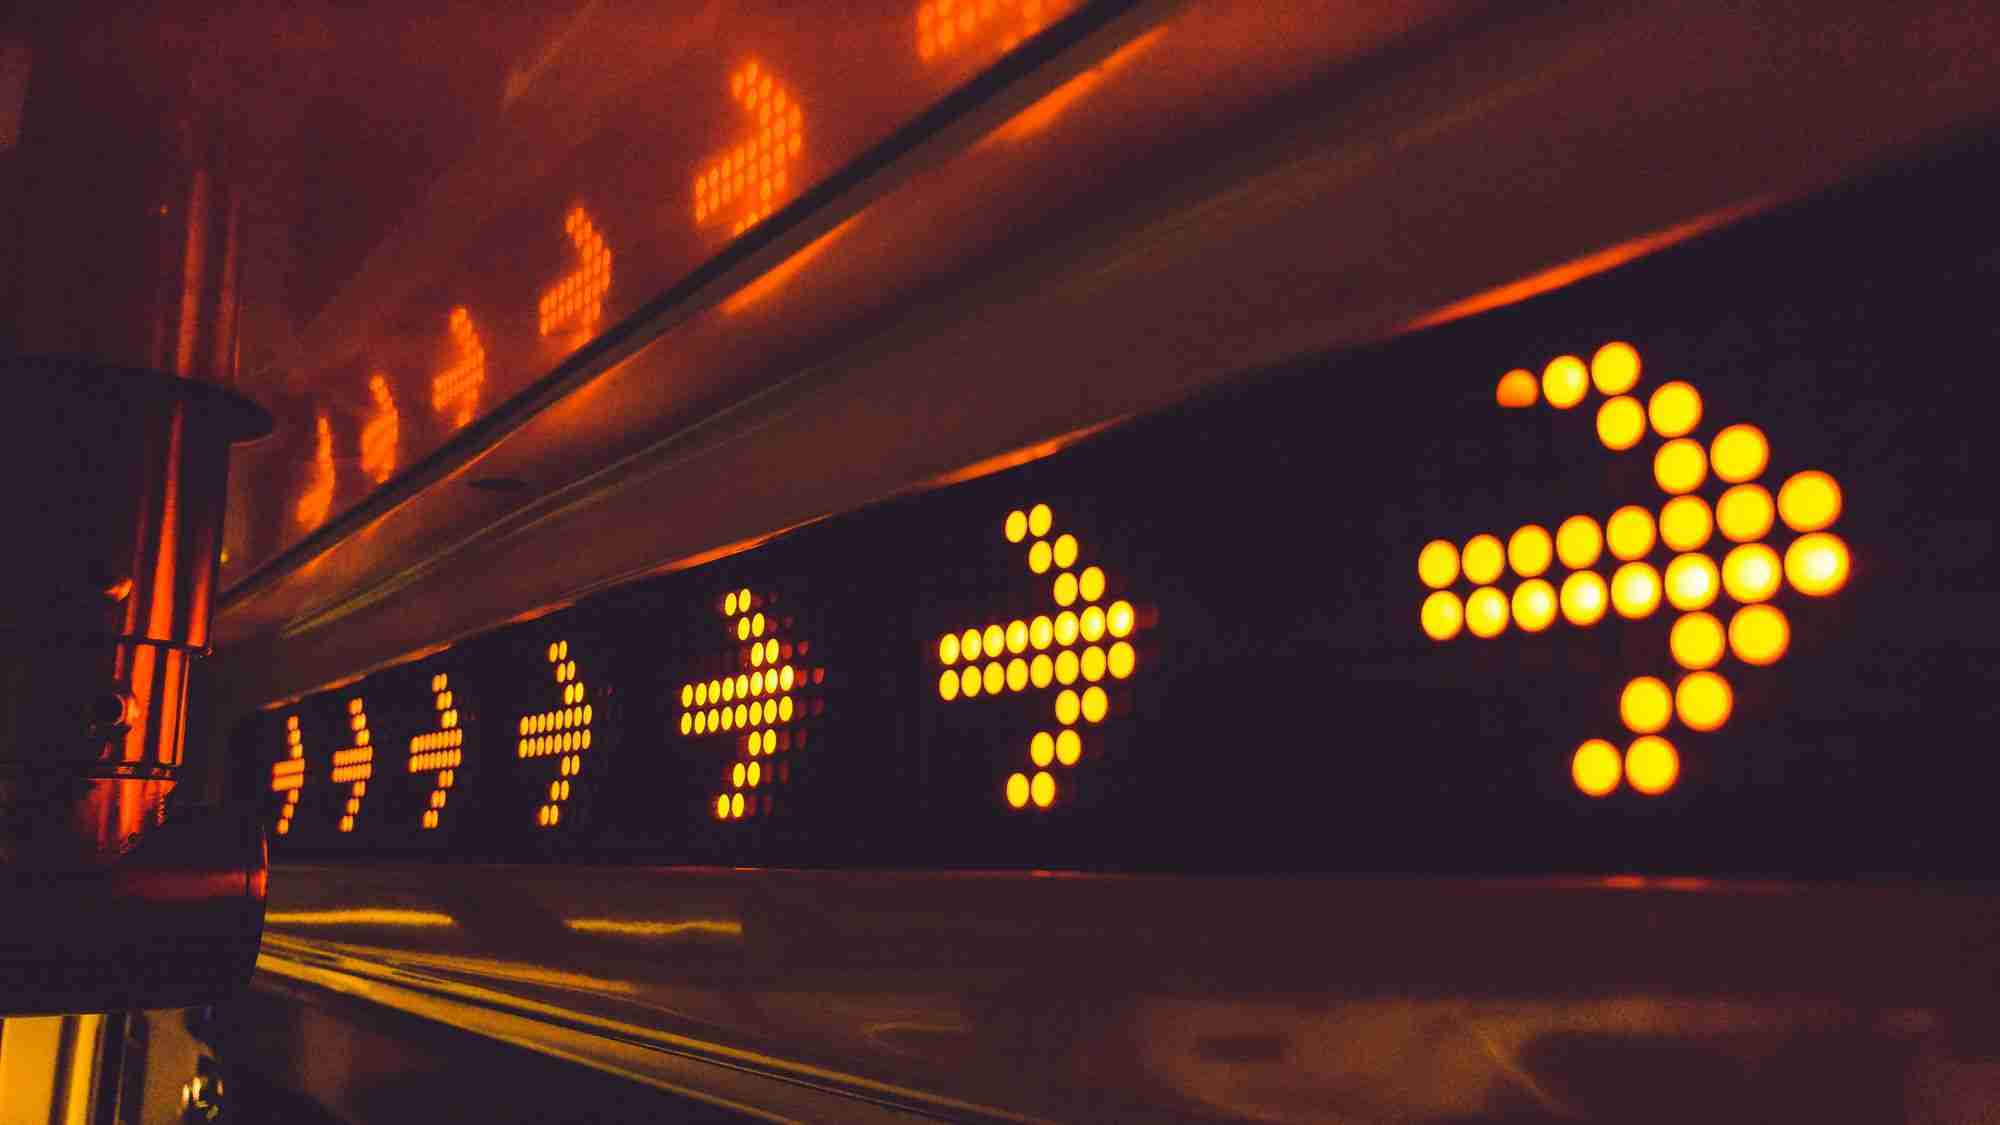 a close up of a train with yellow lights.